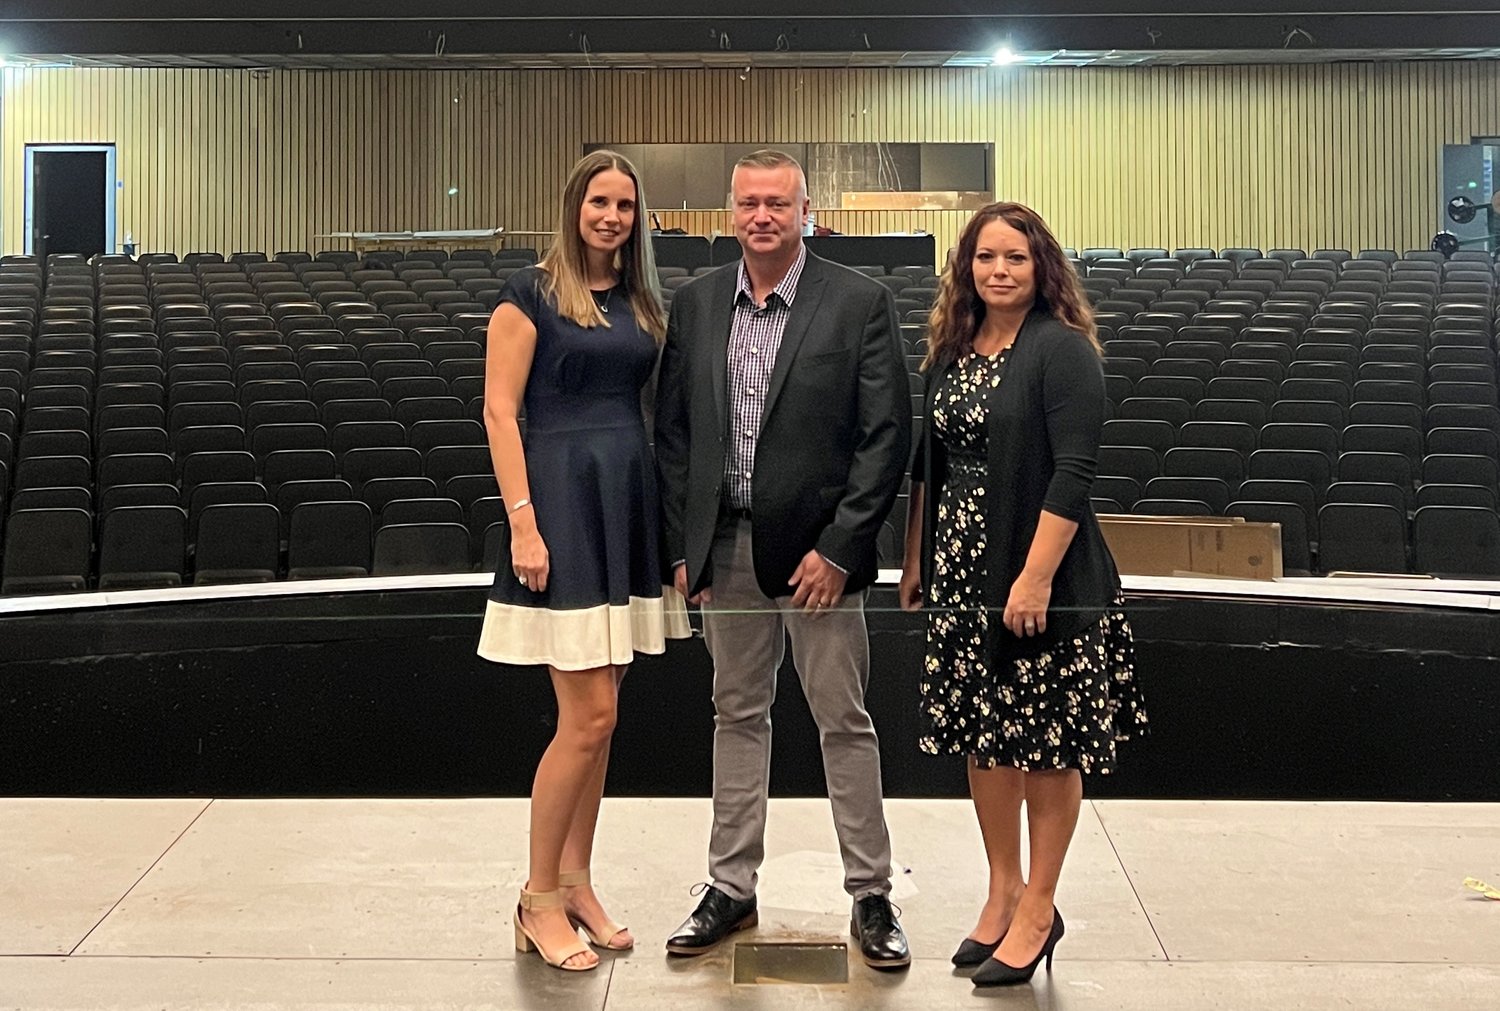 Emily Burcham and Jeremy Burcham, owners of Meridian Title, and Tricia Chapman, sponsorship coordinator for Nixa Public Schools, showcase the performance hall inside of the Aetos Center for The Performing Arts.